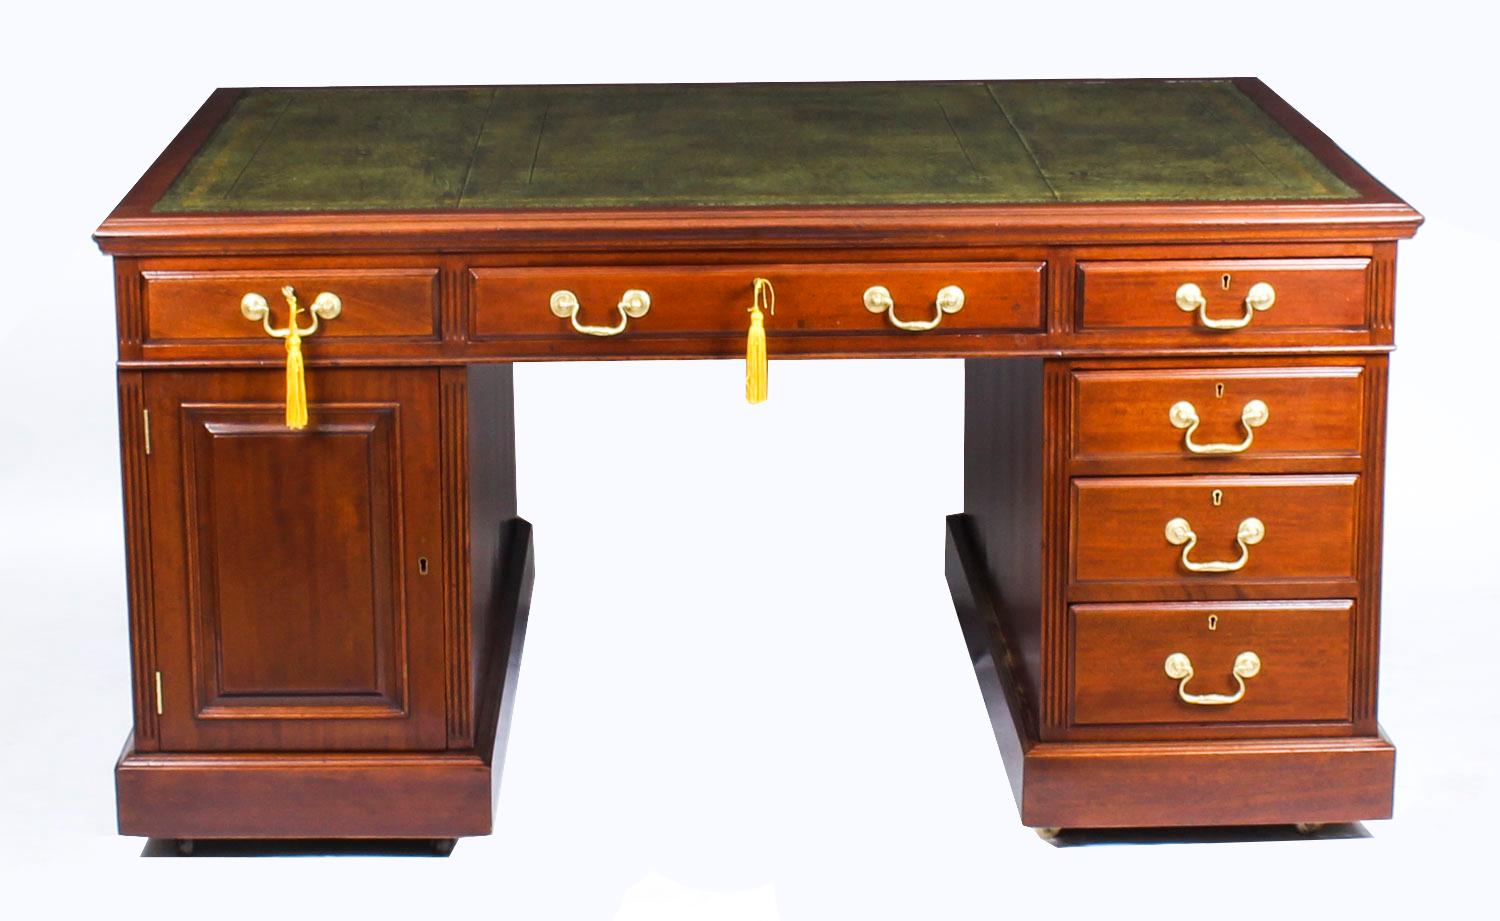 This is a wonderful antique late Victorian mahogany partners pedestal desk, circa 1880 in date.

The rectanglular top features a stunning inset green and gold tooled leather writing surface. This stunning desk is the same on each side.

Each side is